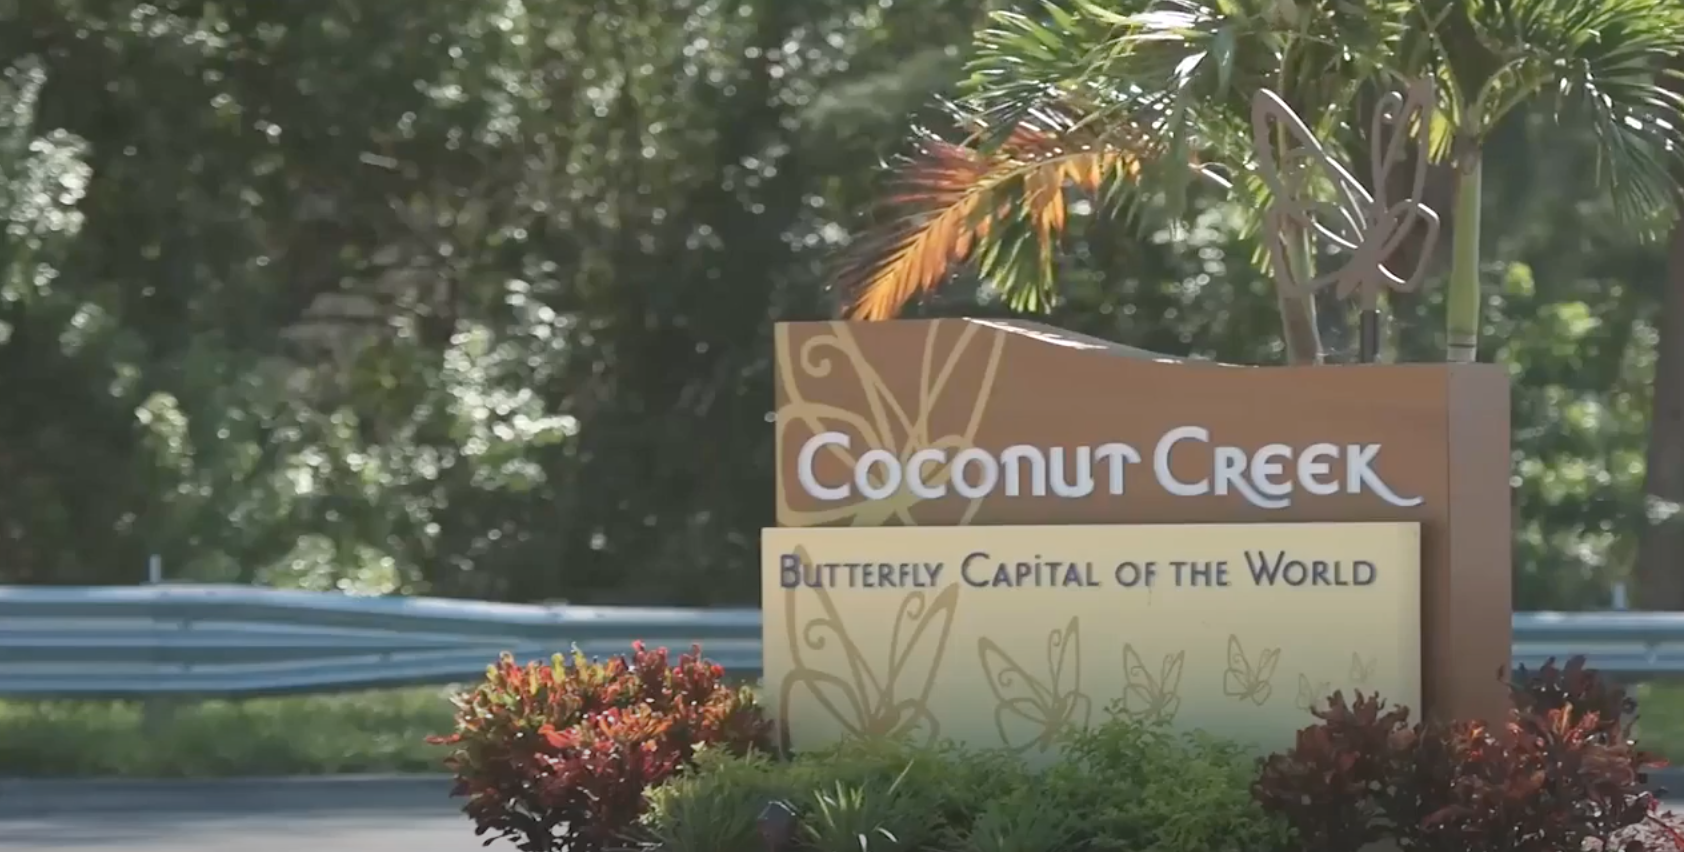 File:Sign for Coconut Creek, Florida "Butterfly Capital of the World".png -  Wikipedia